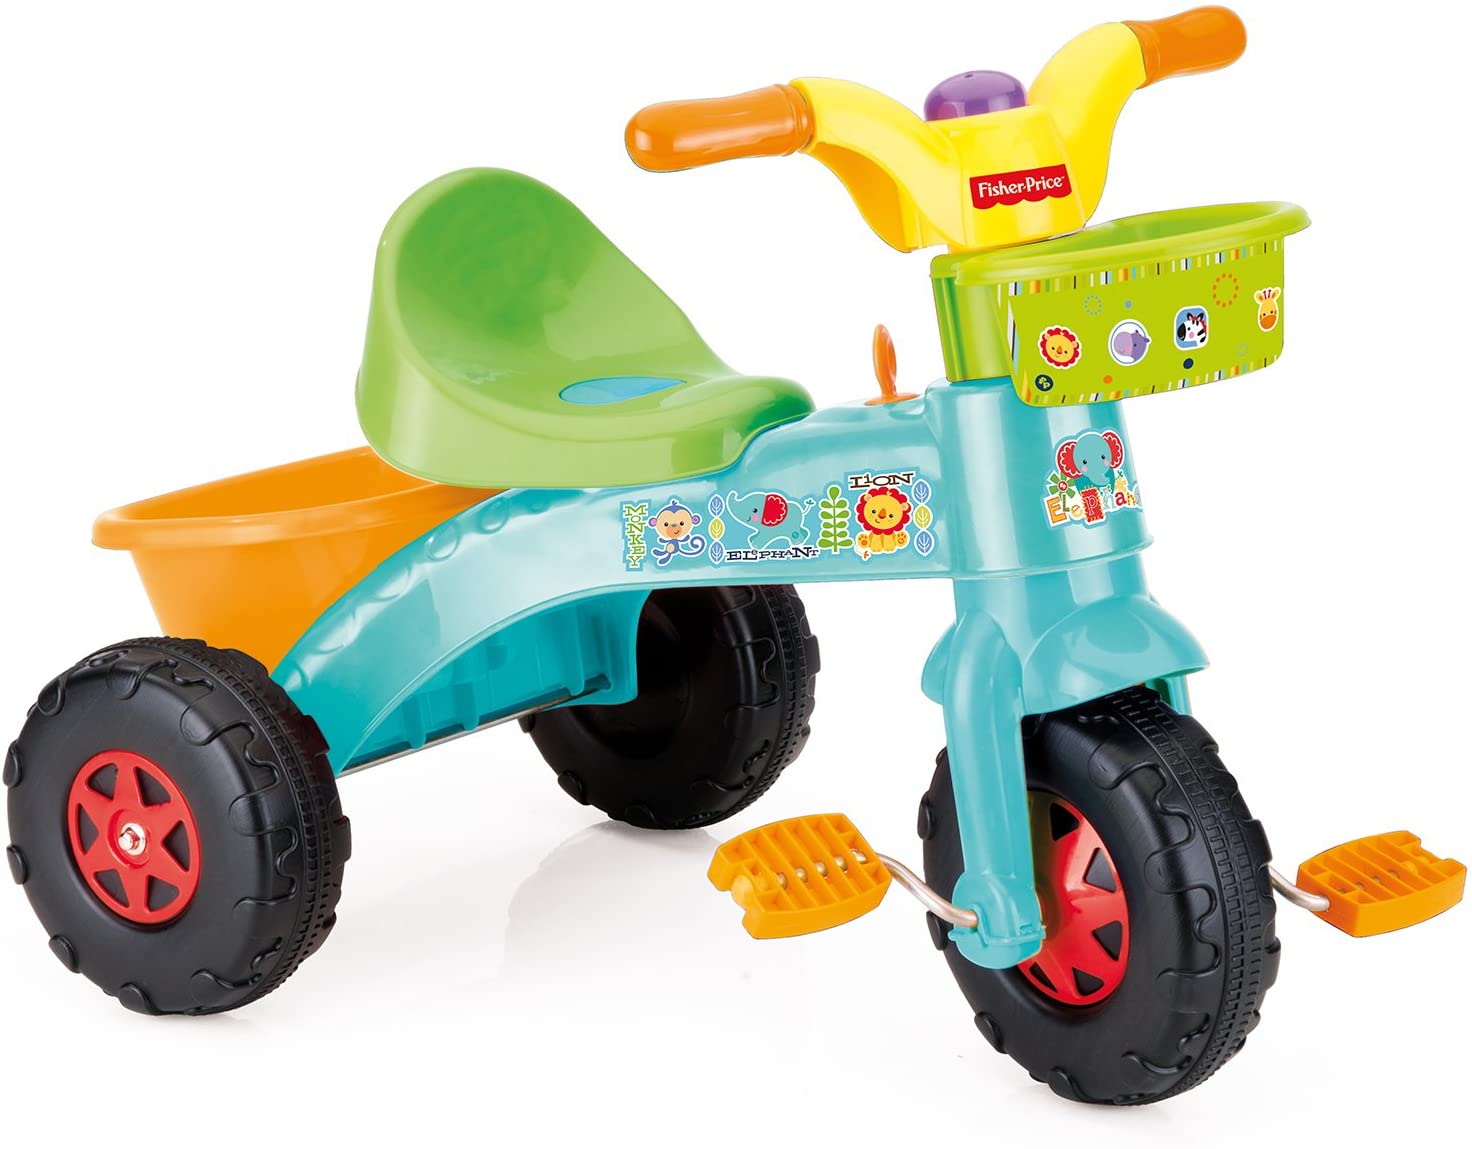 Tricycle – Fisher price